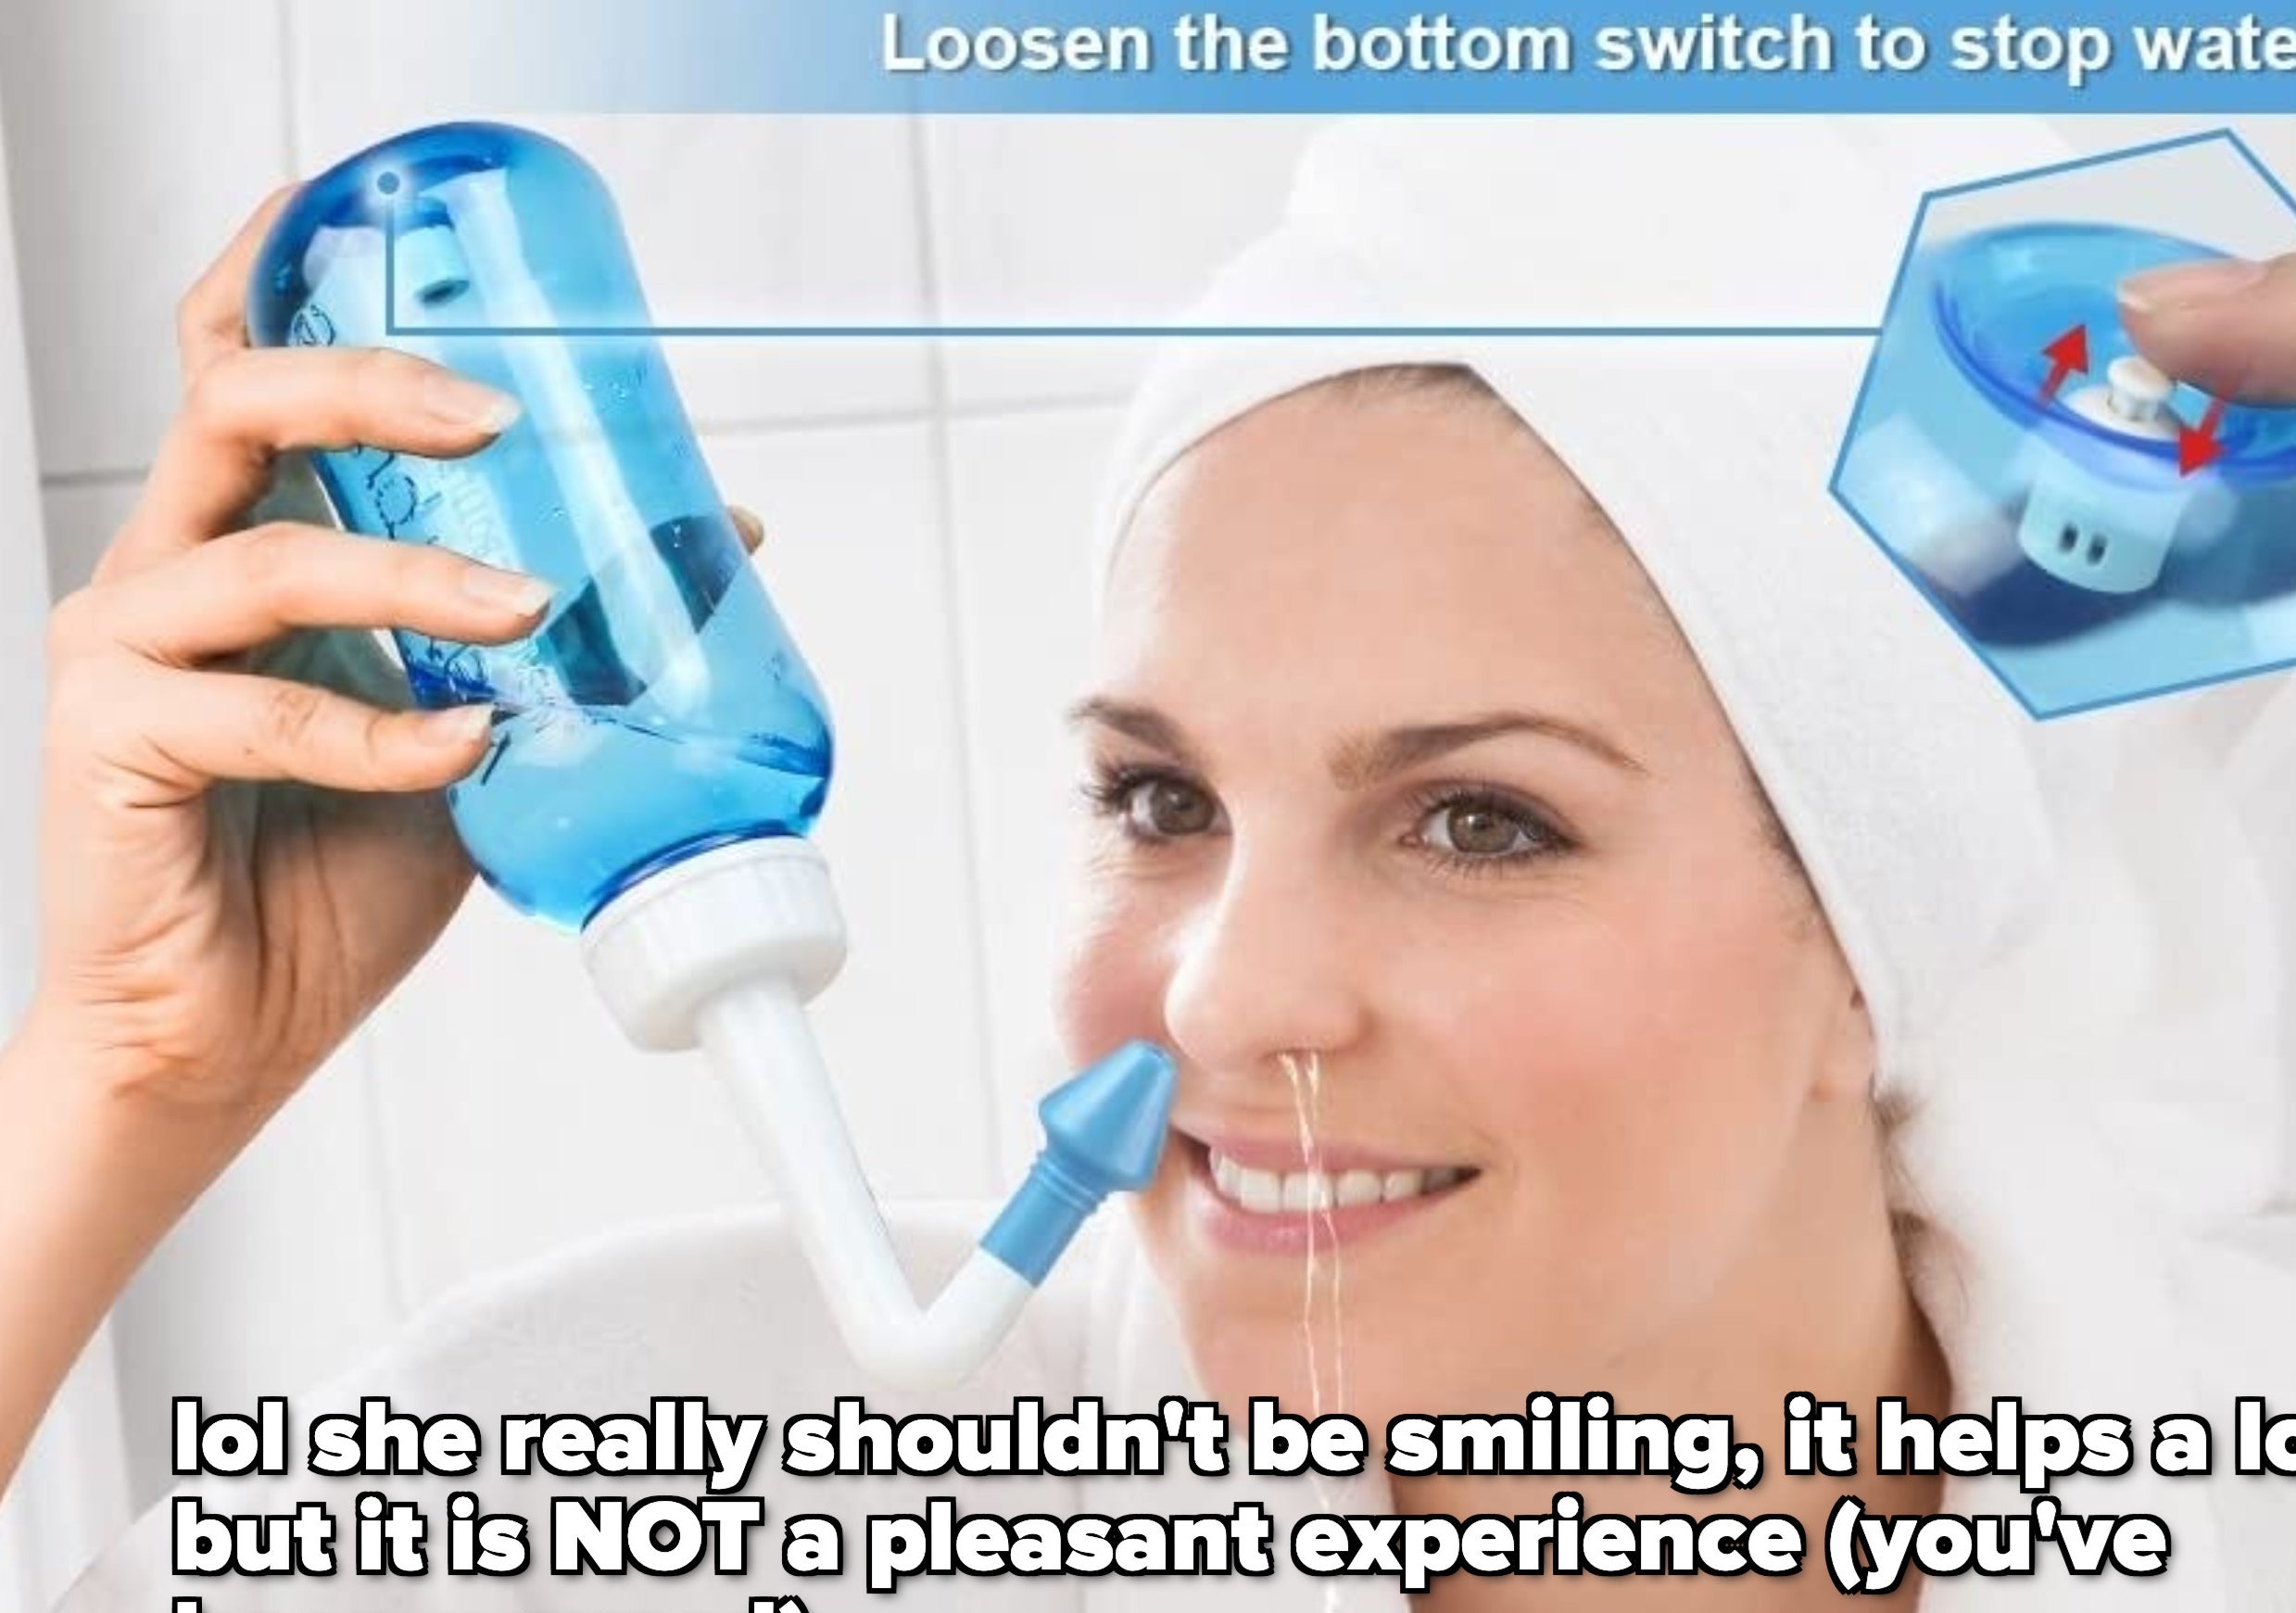 a person using the neti pot set and for whatever reason, smiling